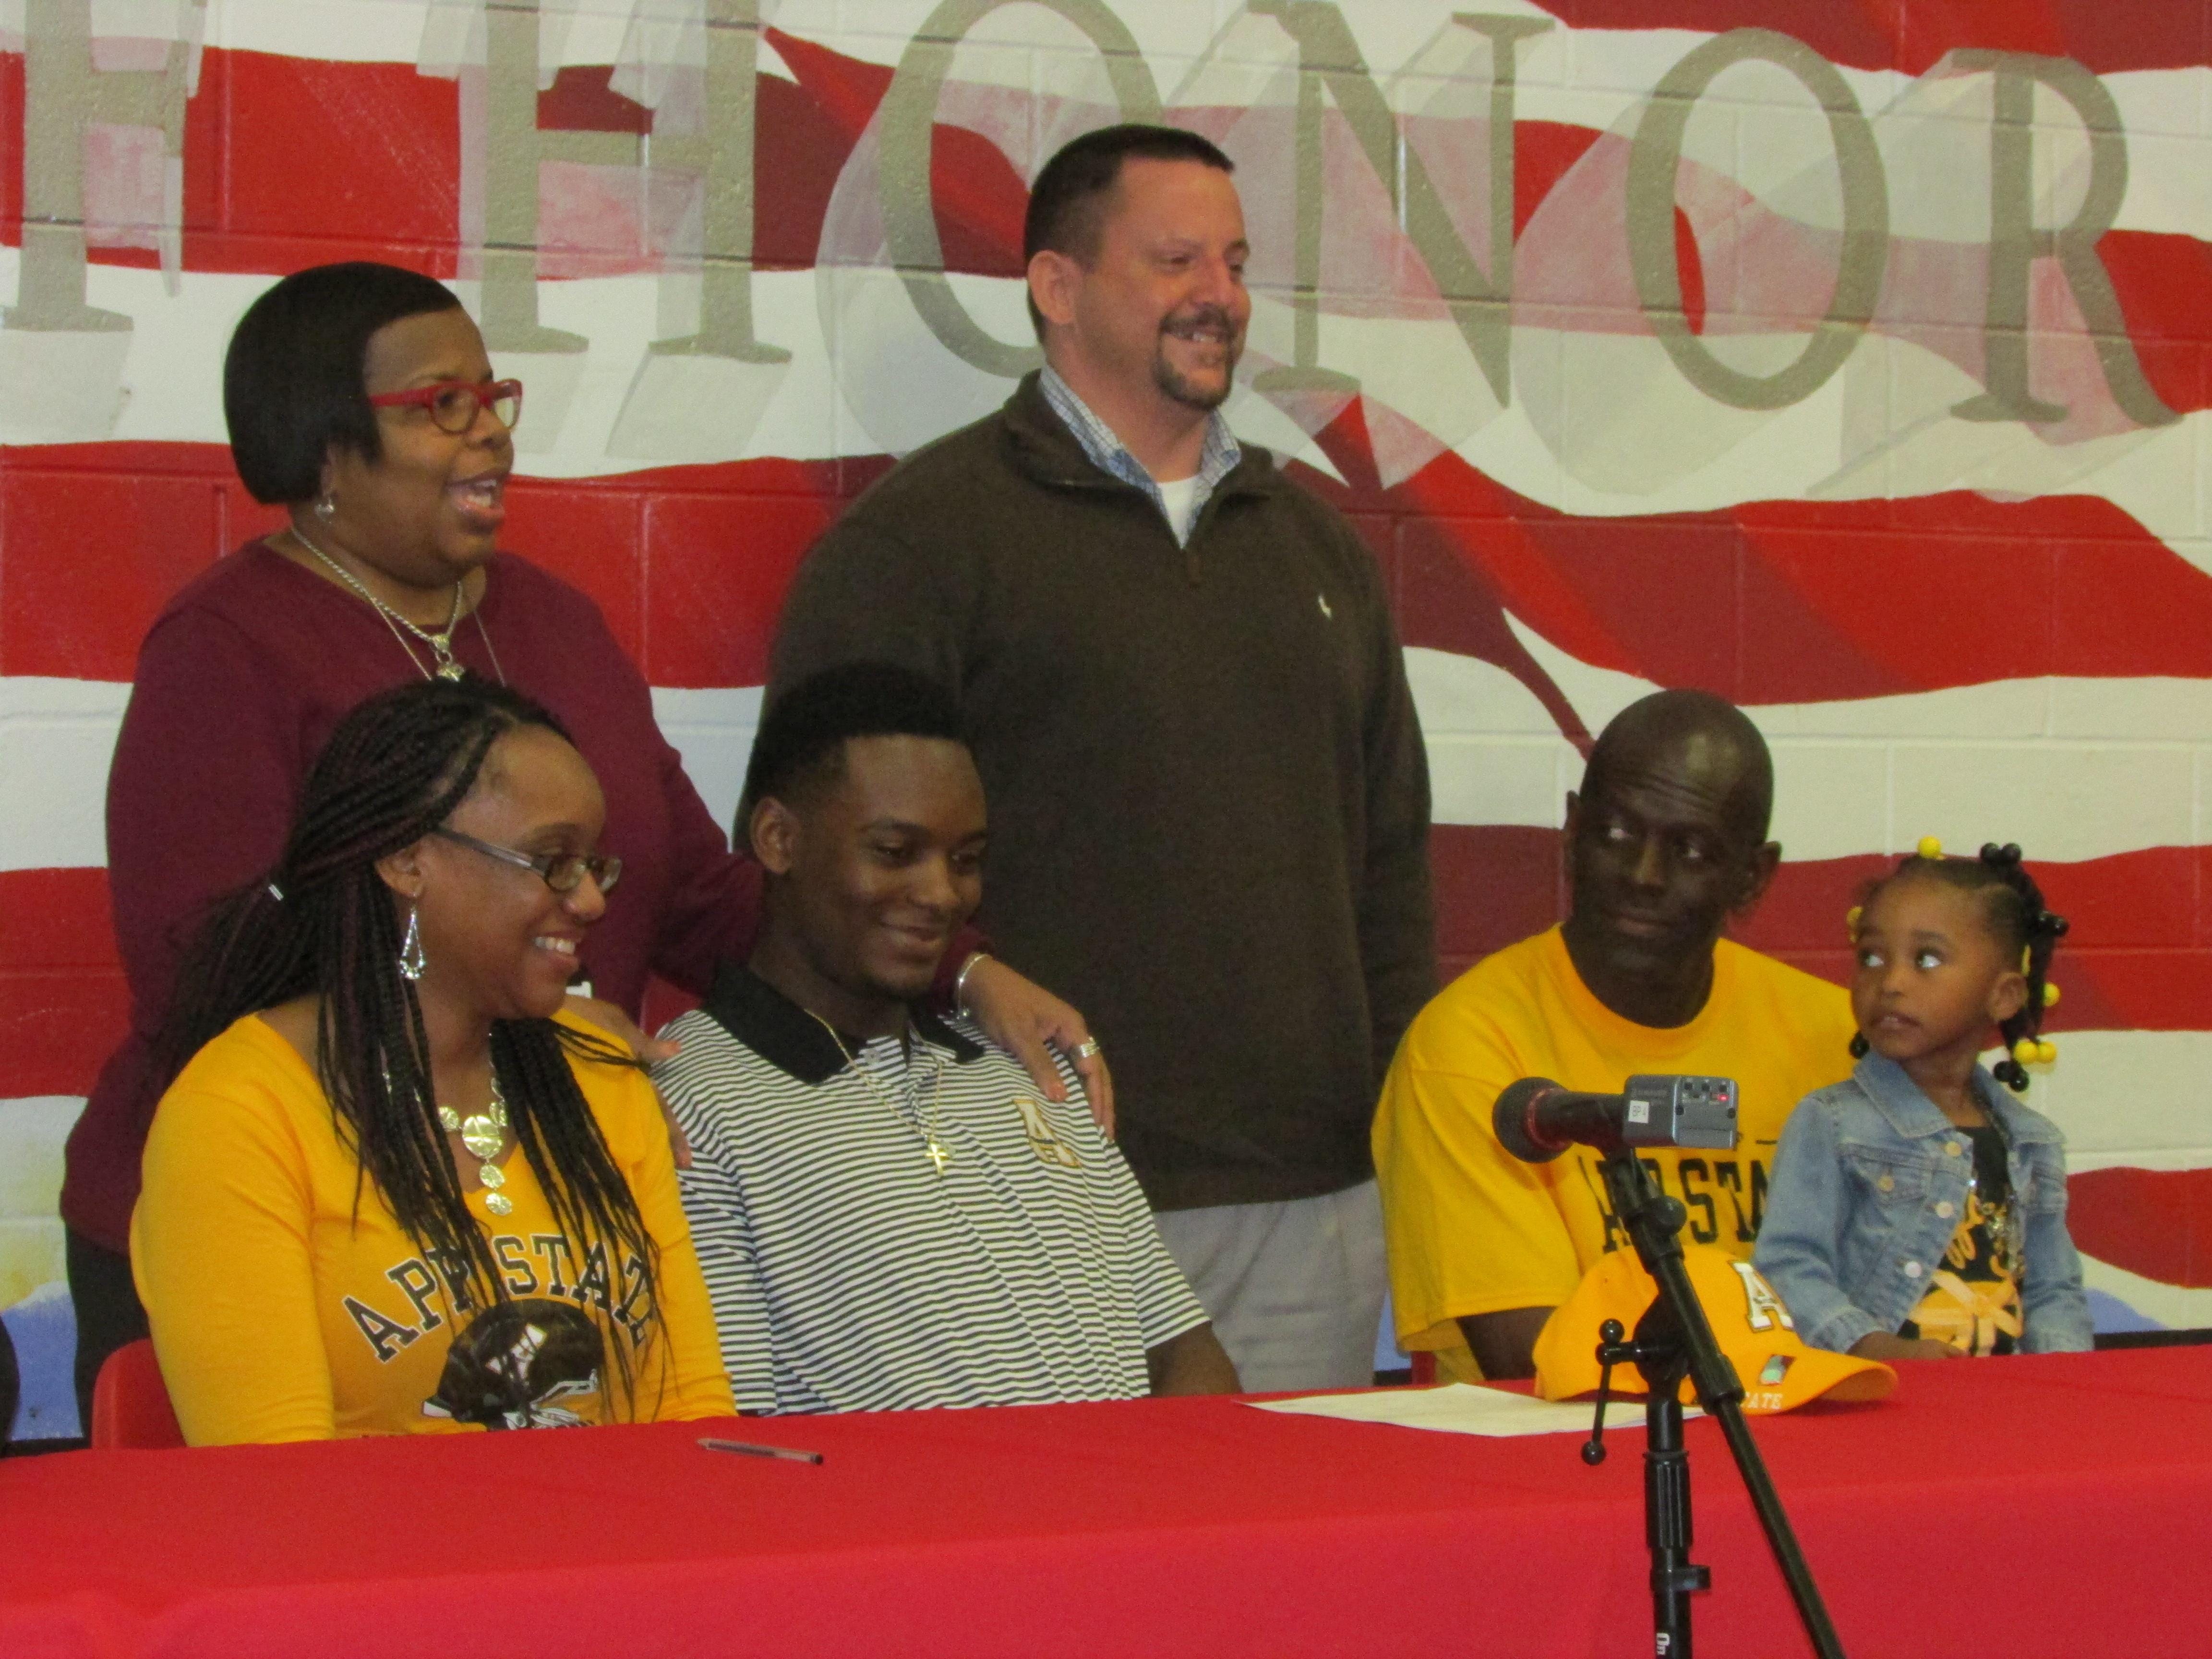 West Florida’s Adarius Purifoy is joined by his parents, West Florida principal Shenna Payne and West Florida coach Harry Lees as he signed with Appalachian State.